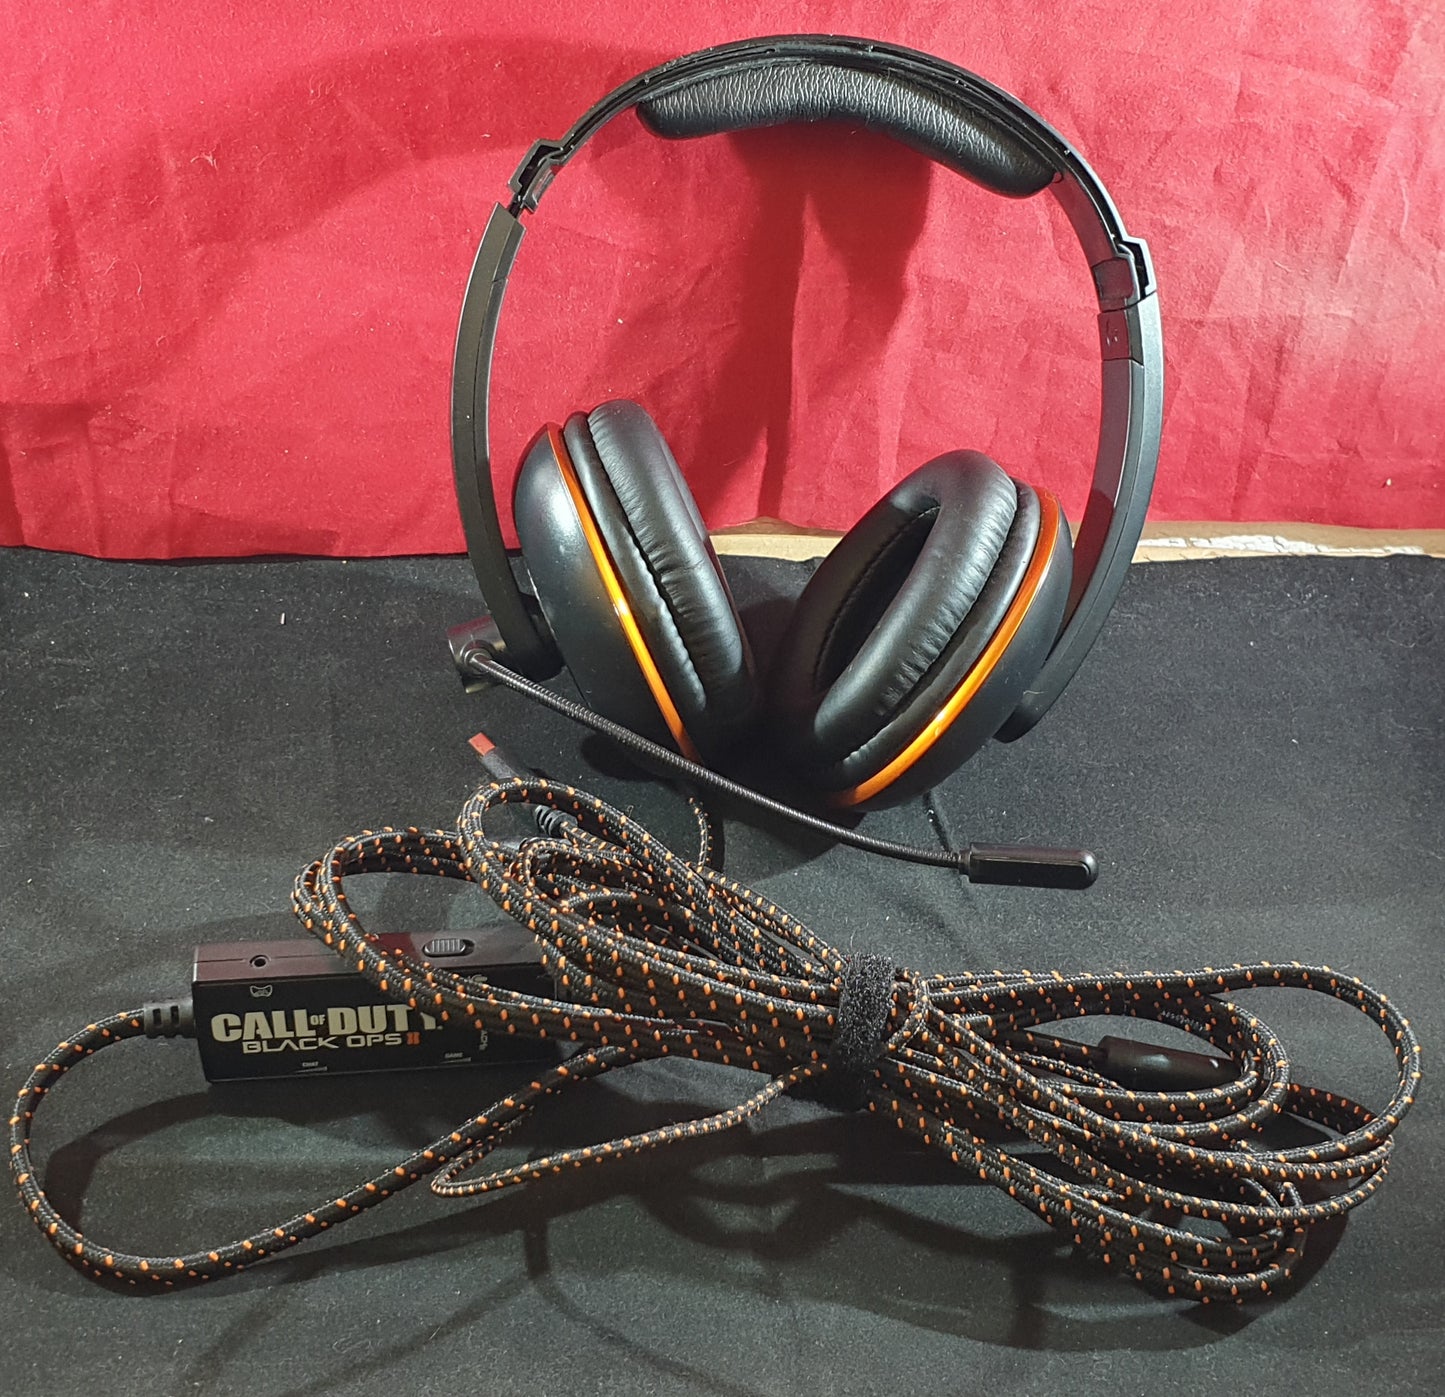 Call of Duty Black Ops II Turtle Beach Kilo Gaming Headset PS3, PC & Xbox 360 Accessory